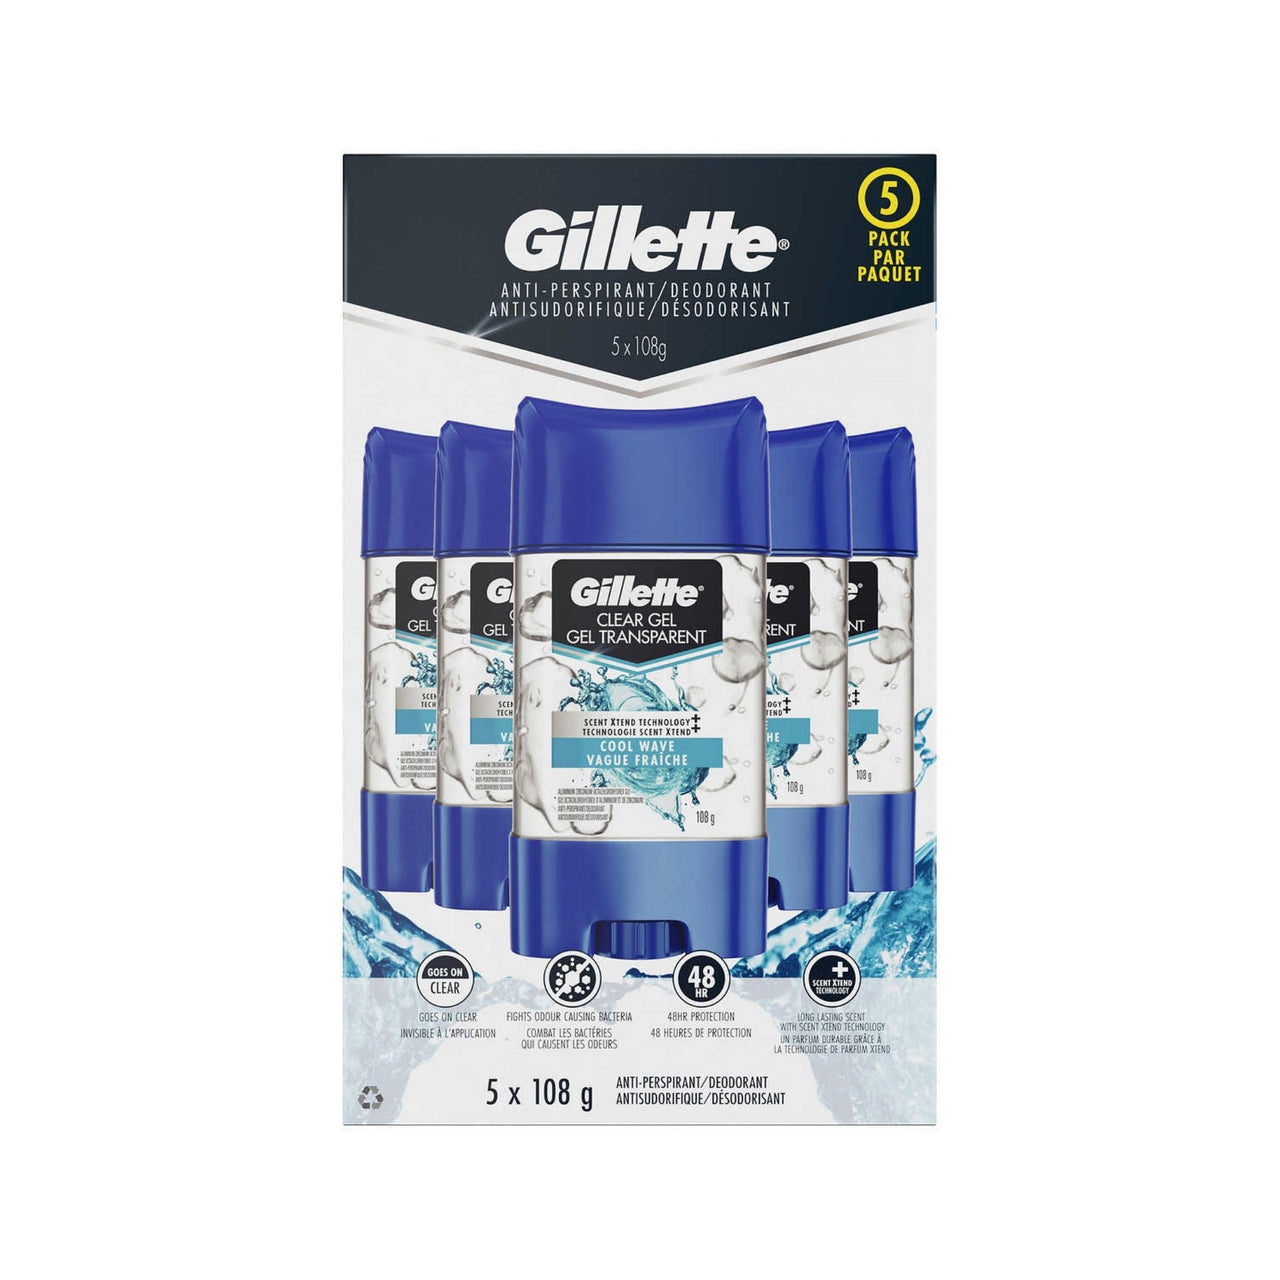 Image of Gillette Clear Gel Antiperspirant and Deodorant 5x108 g